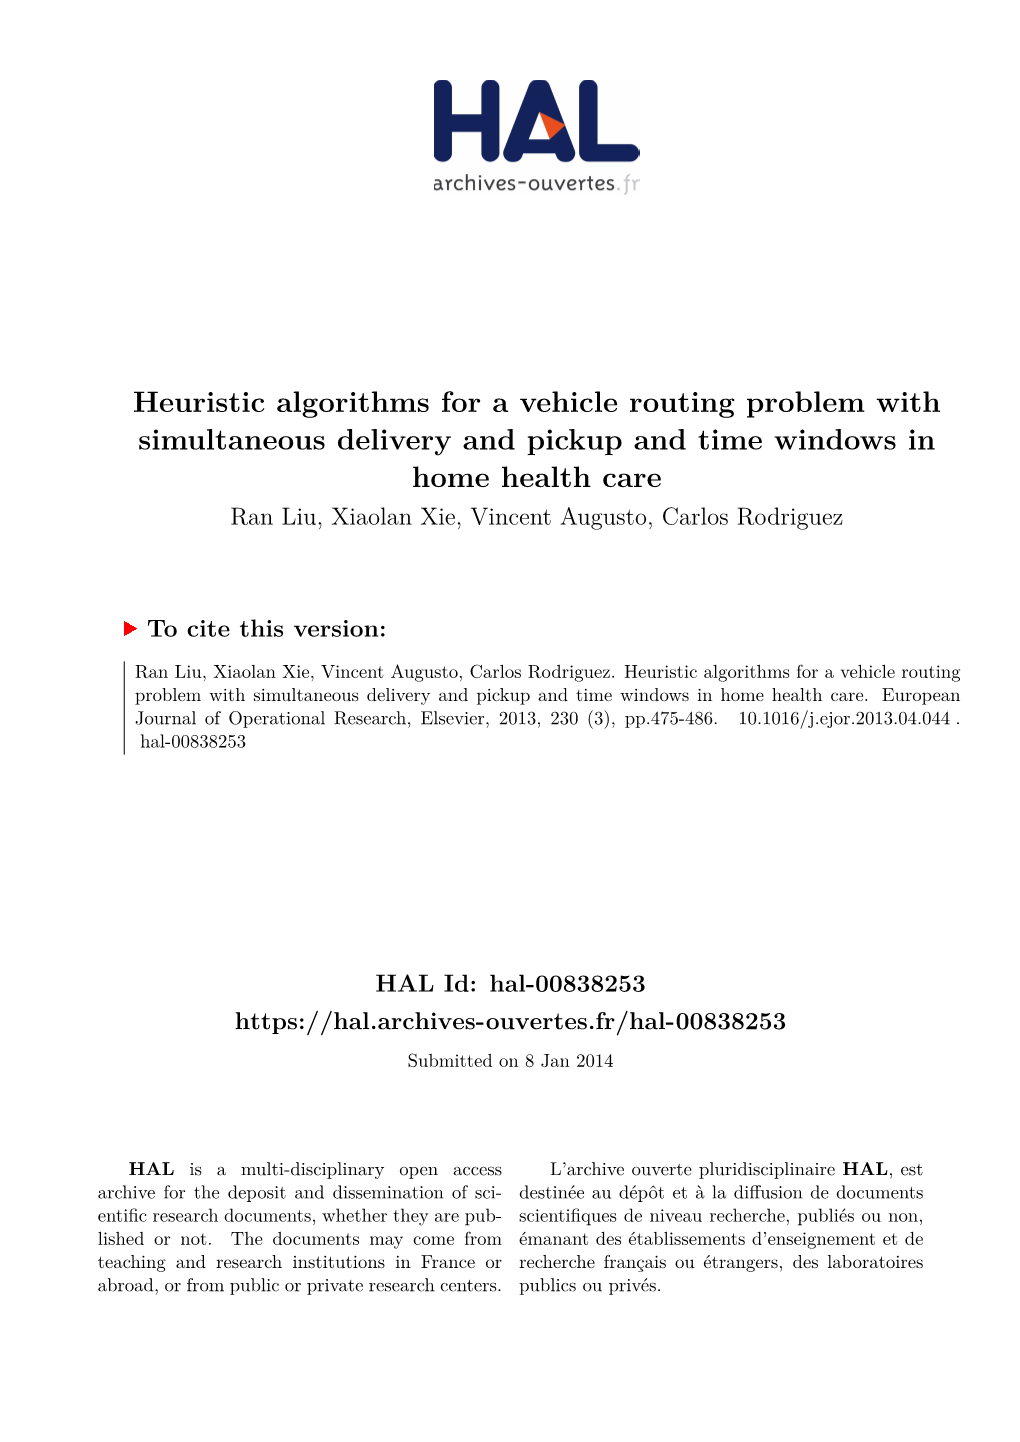 Heuristic Algorithms for a Vehicle Routing Problem with Simultaneous